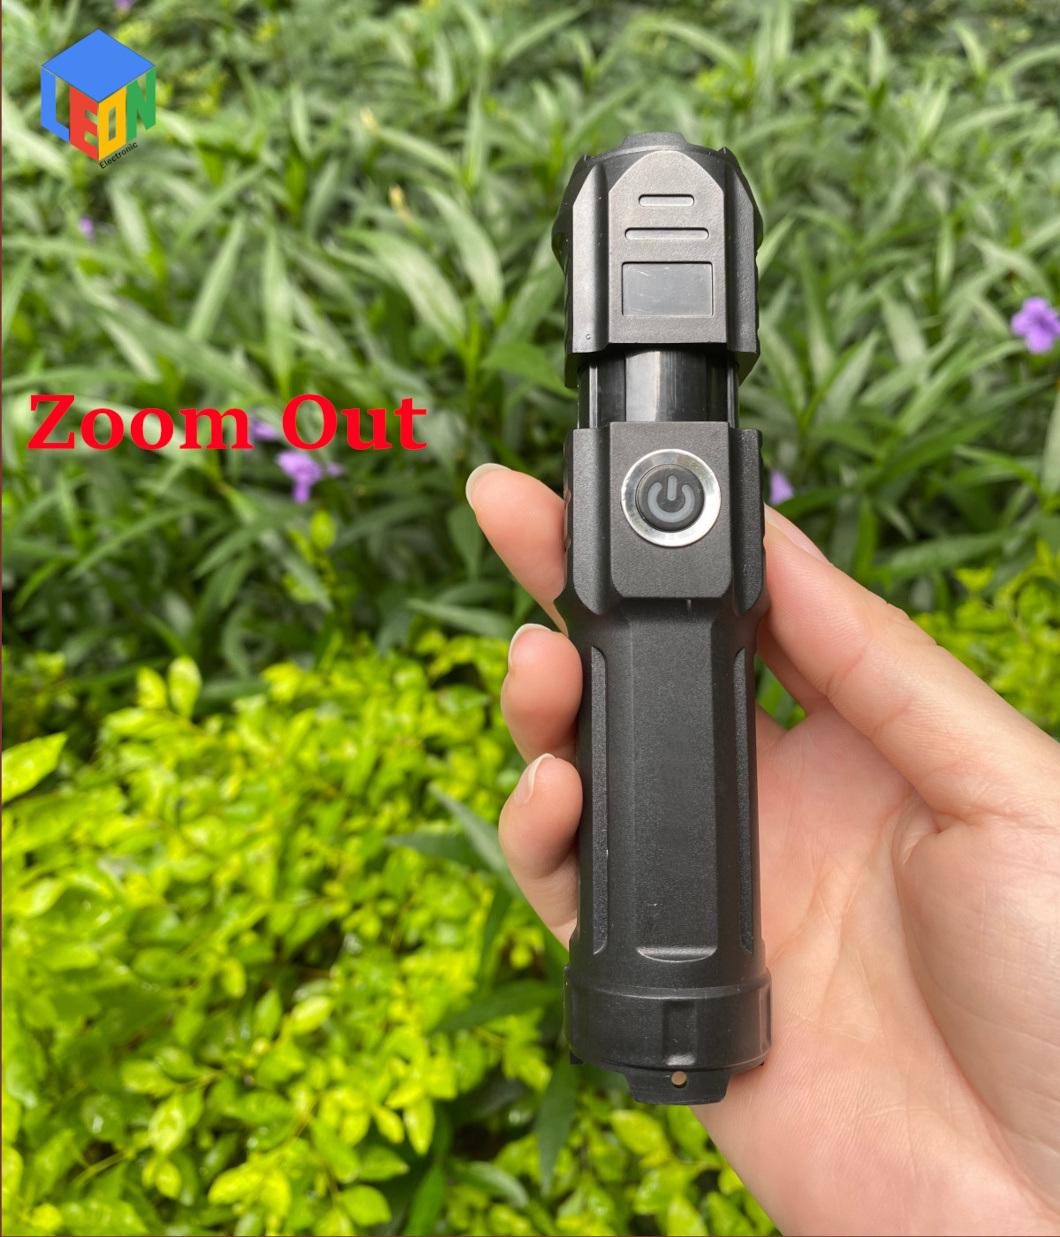 USB Rechargeable Water Proof Outdoor Camping Search and Work LED Flashlight with Zoom in and Zoom out Function